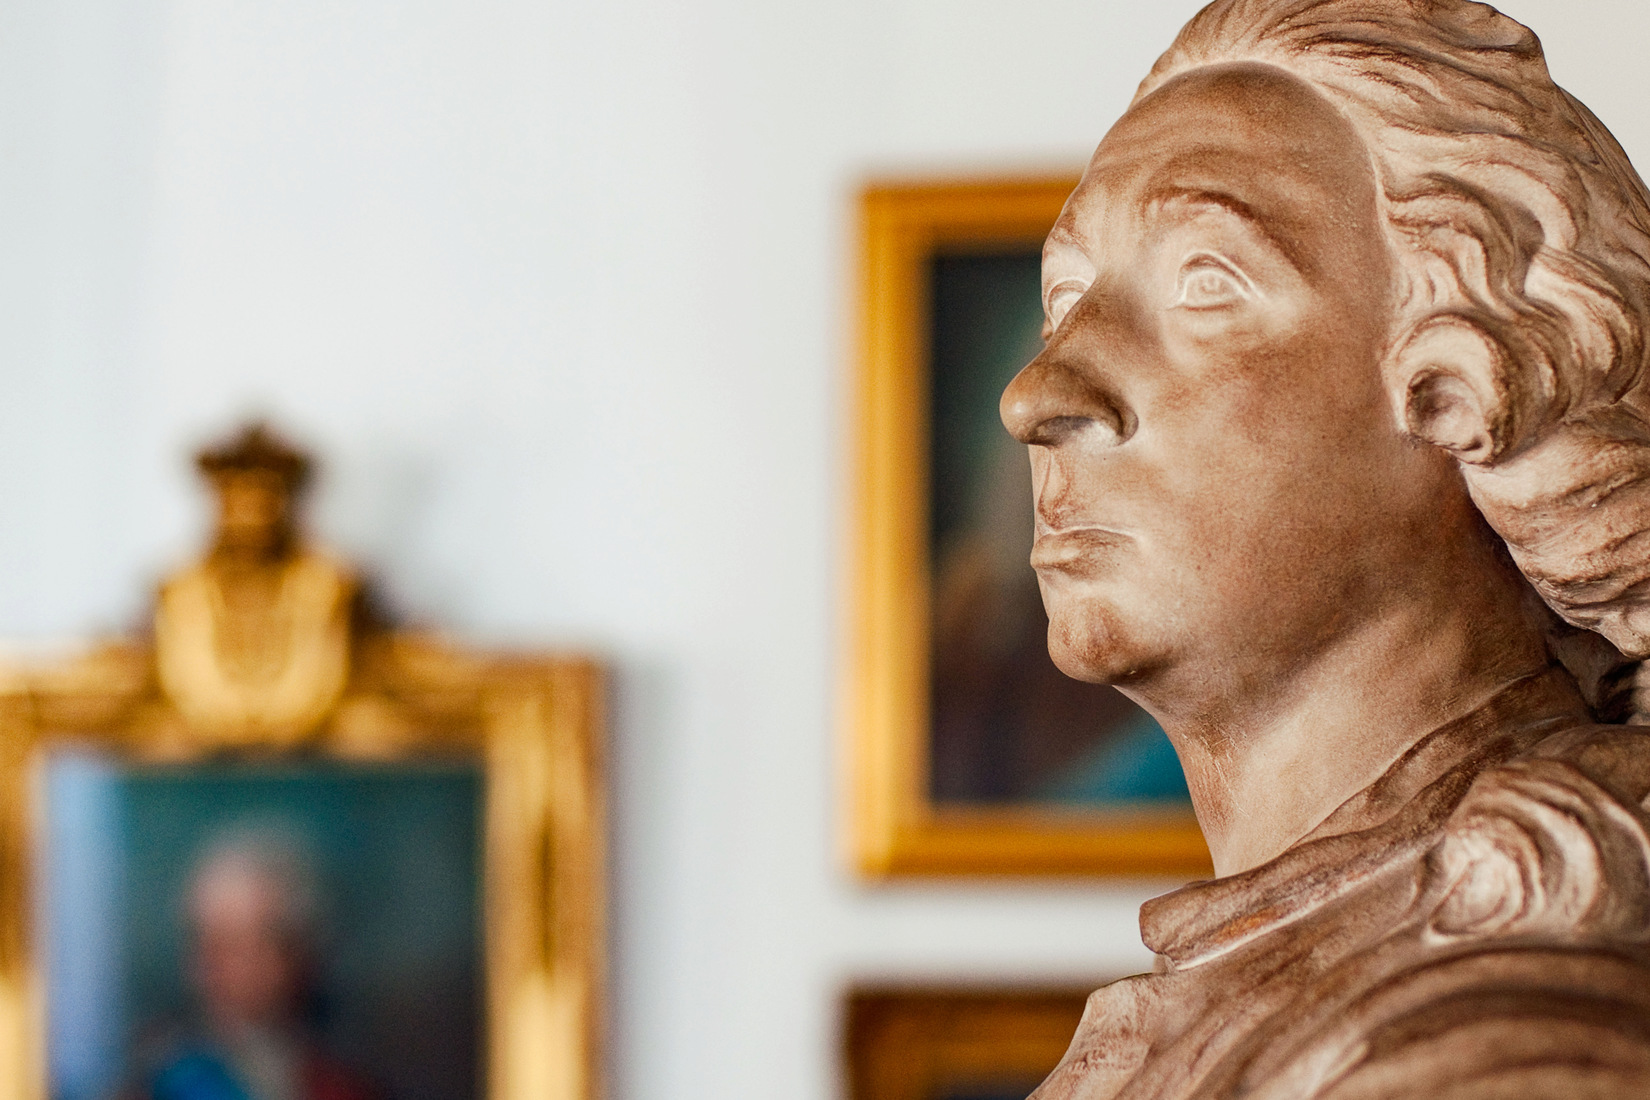 Bust of a man, belonging to the art collection of the Institut Tessin